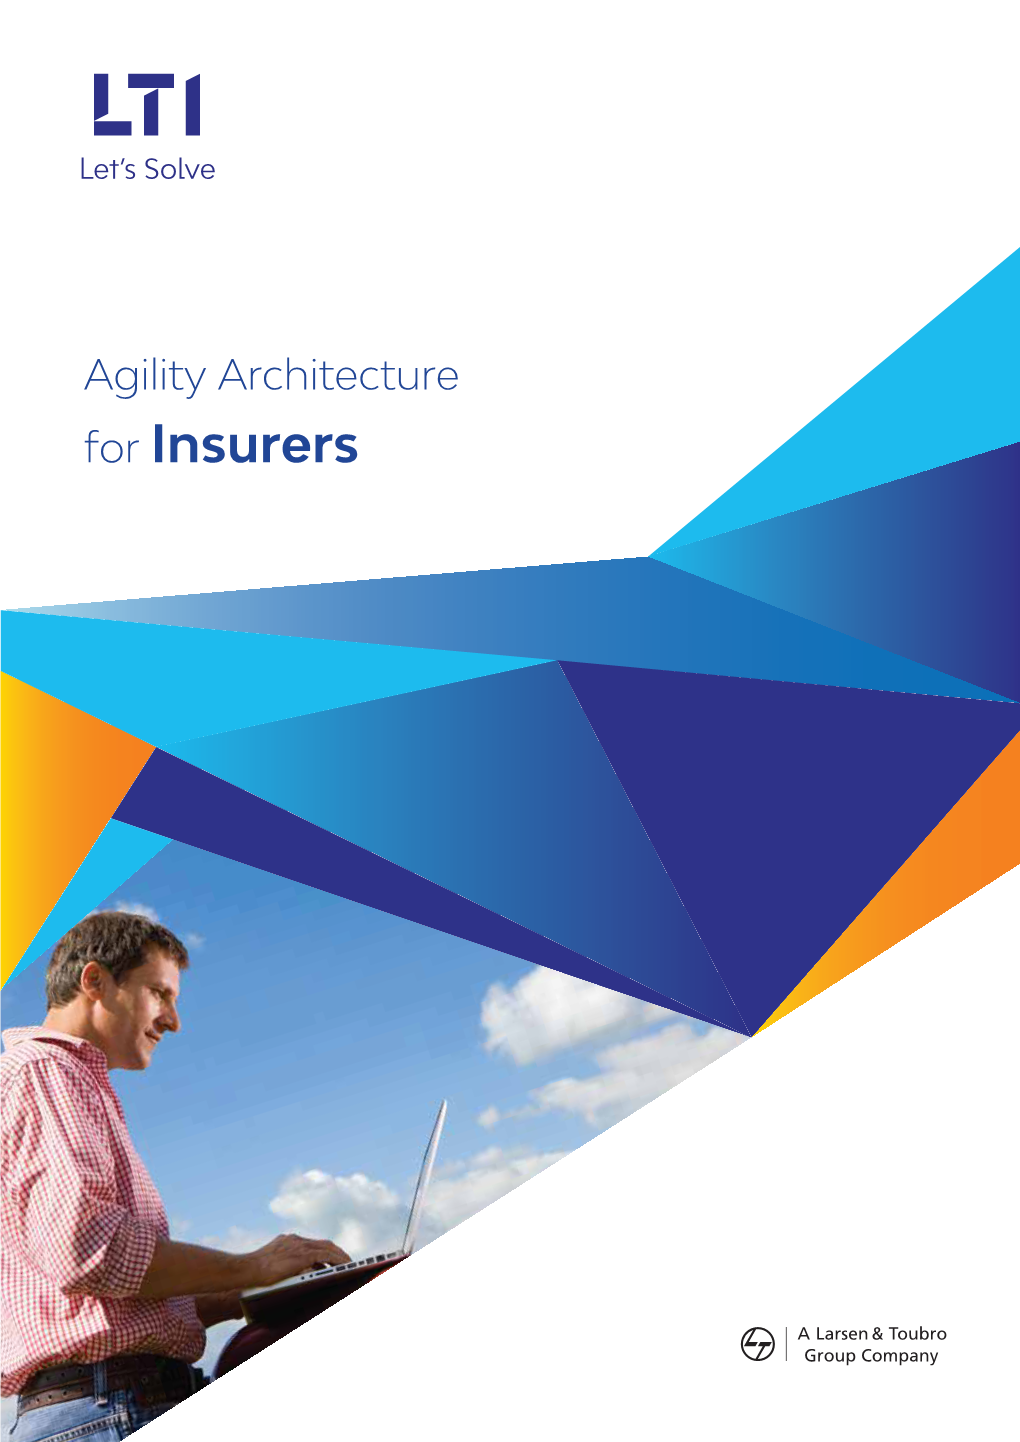 For Insurers Agility Architecture for Insurers